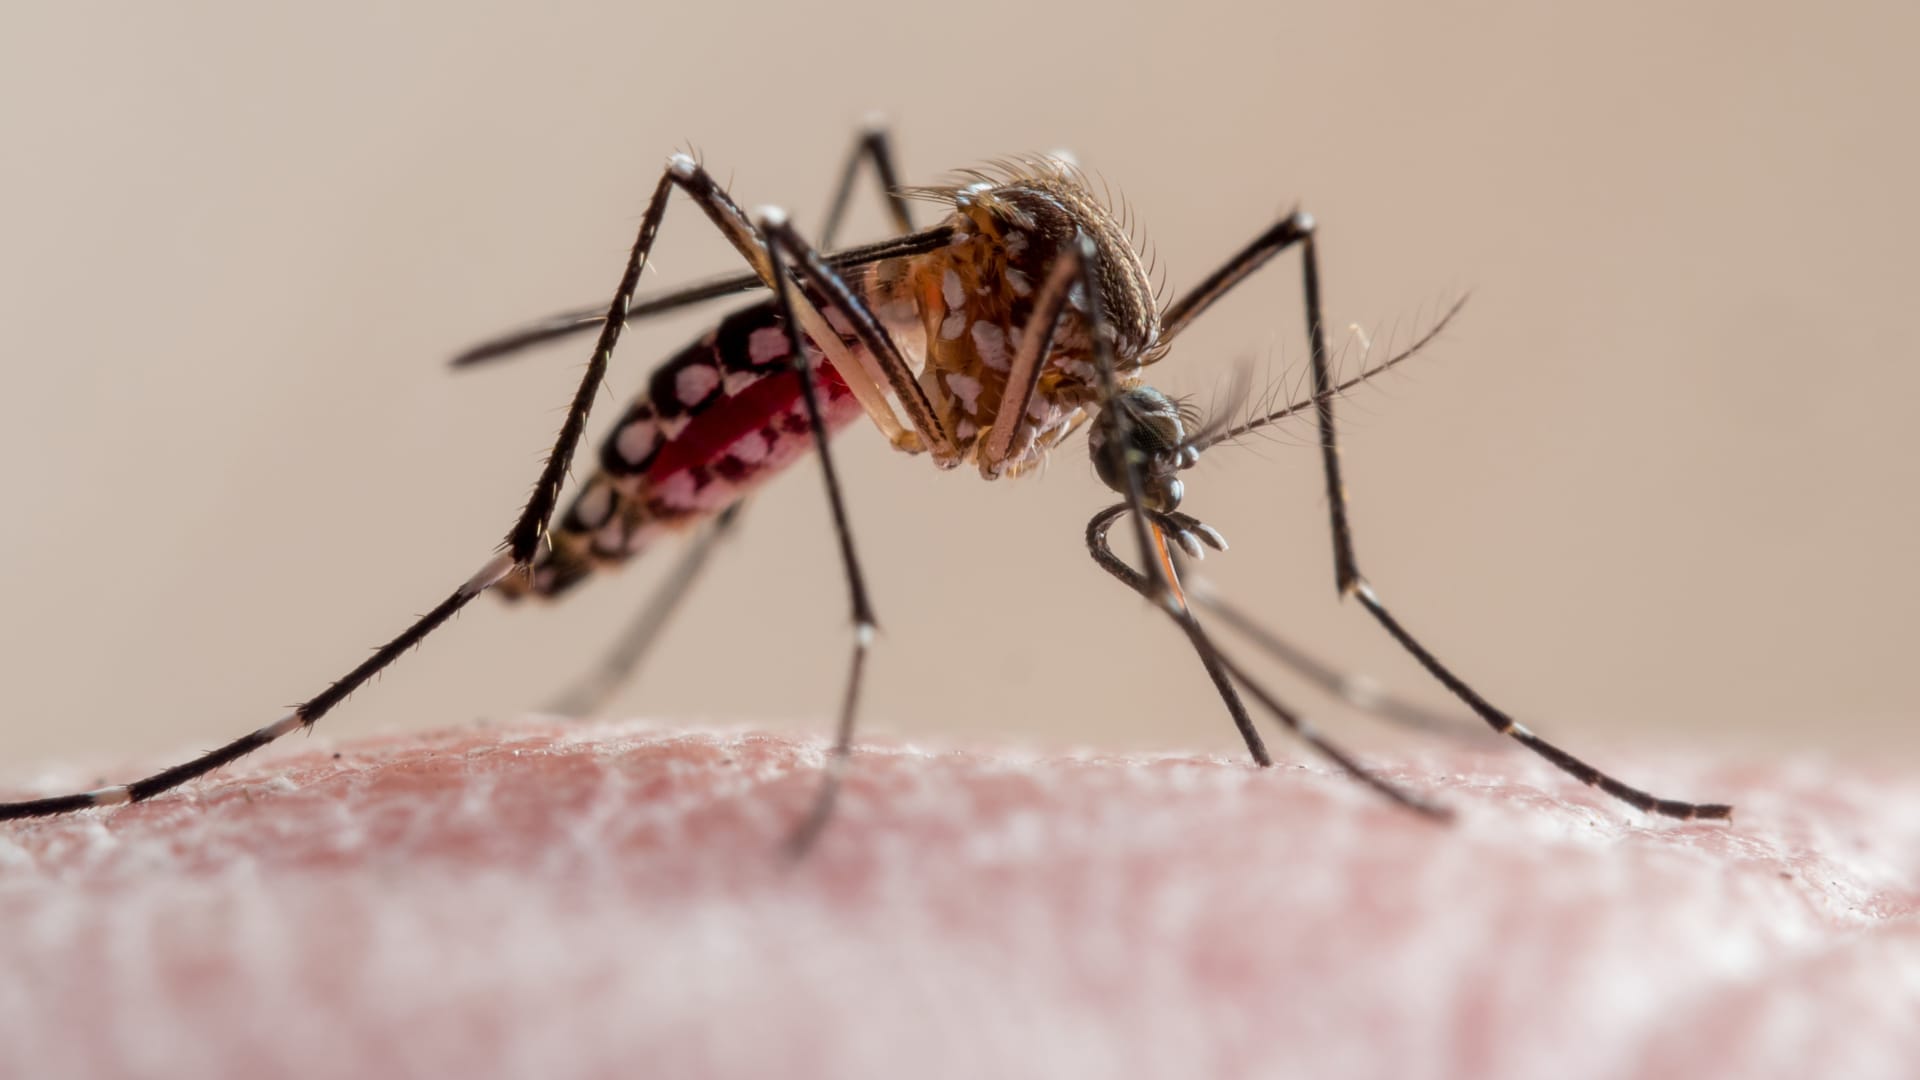 CDC issues dengue fever alert in the U.S.